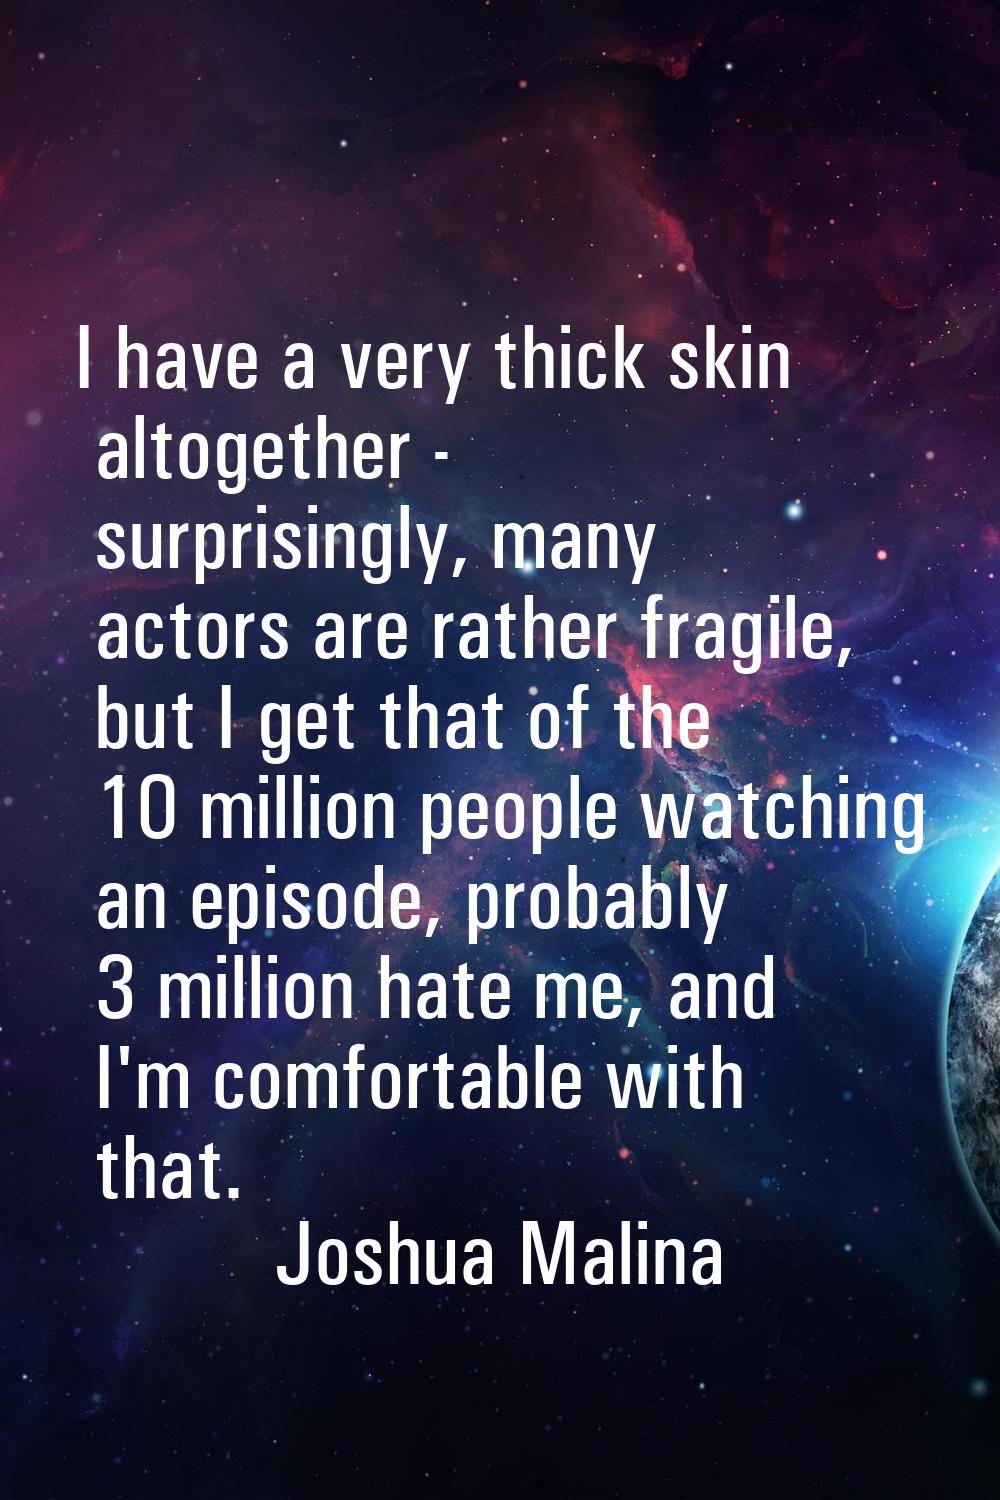 I have a very thick skin altogether - surprisingly, many actors are rather fragile, but I get that 